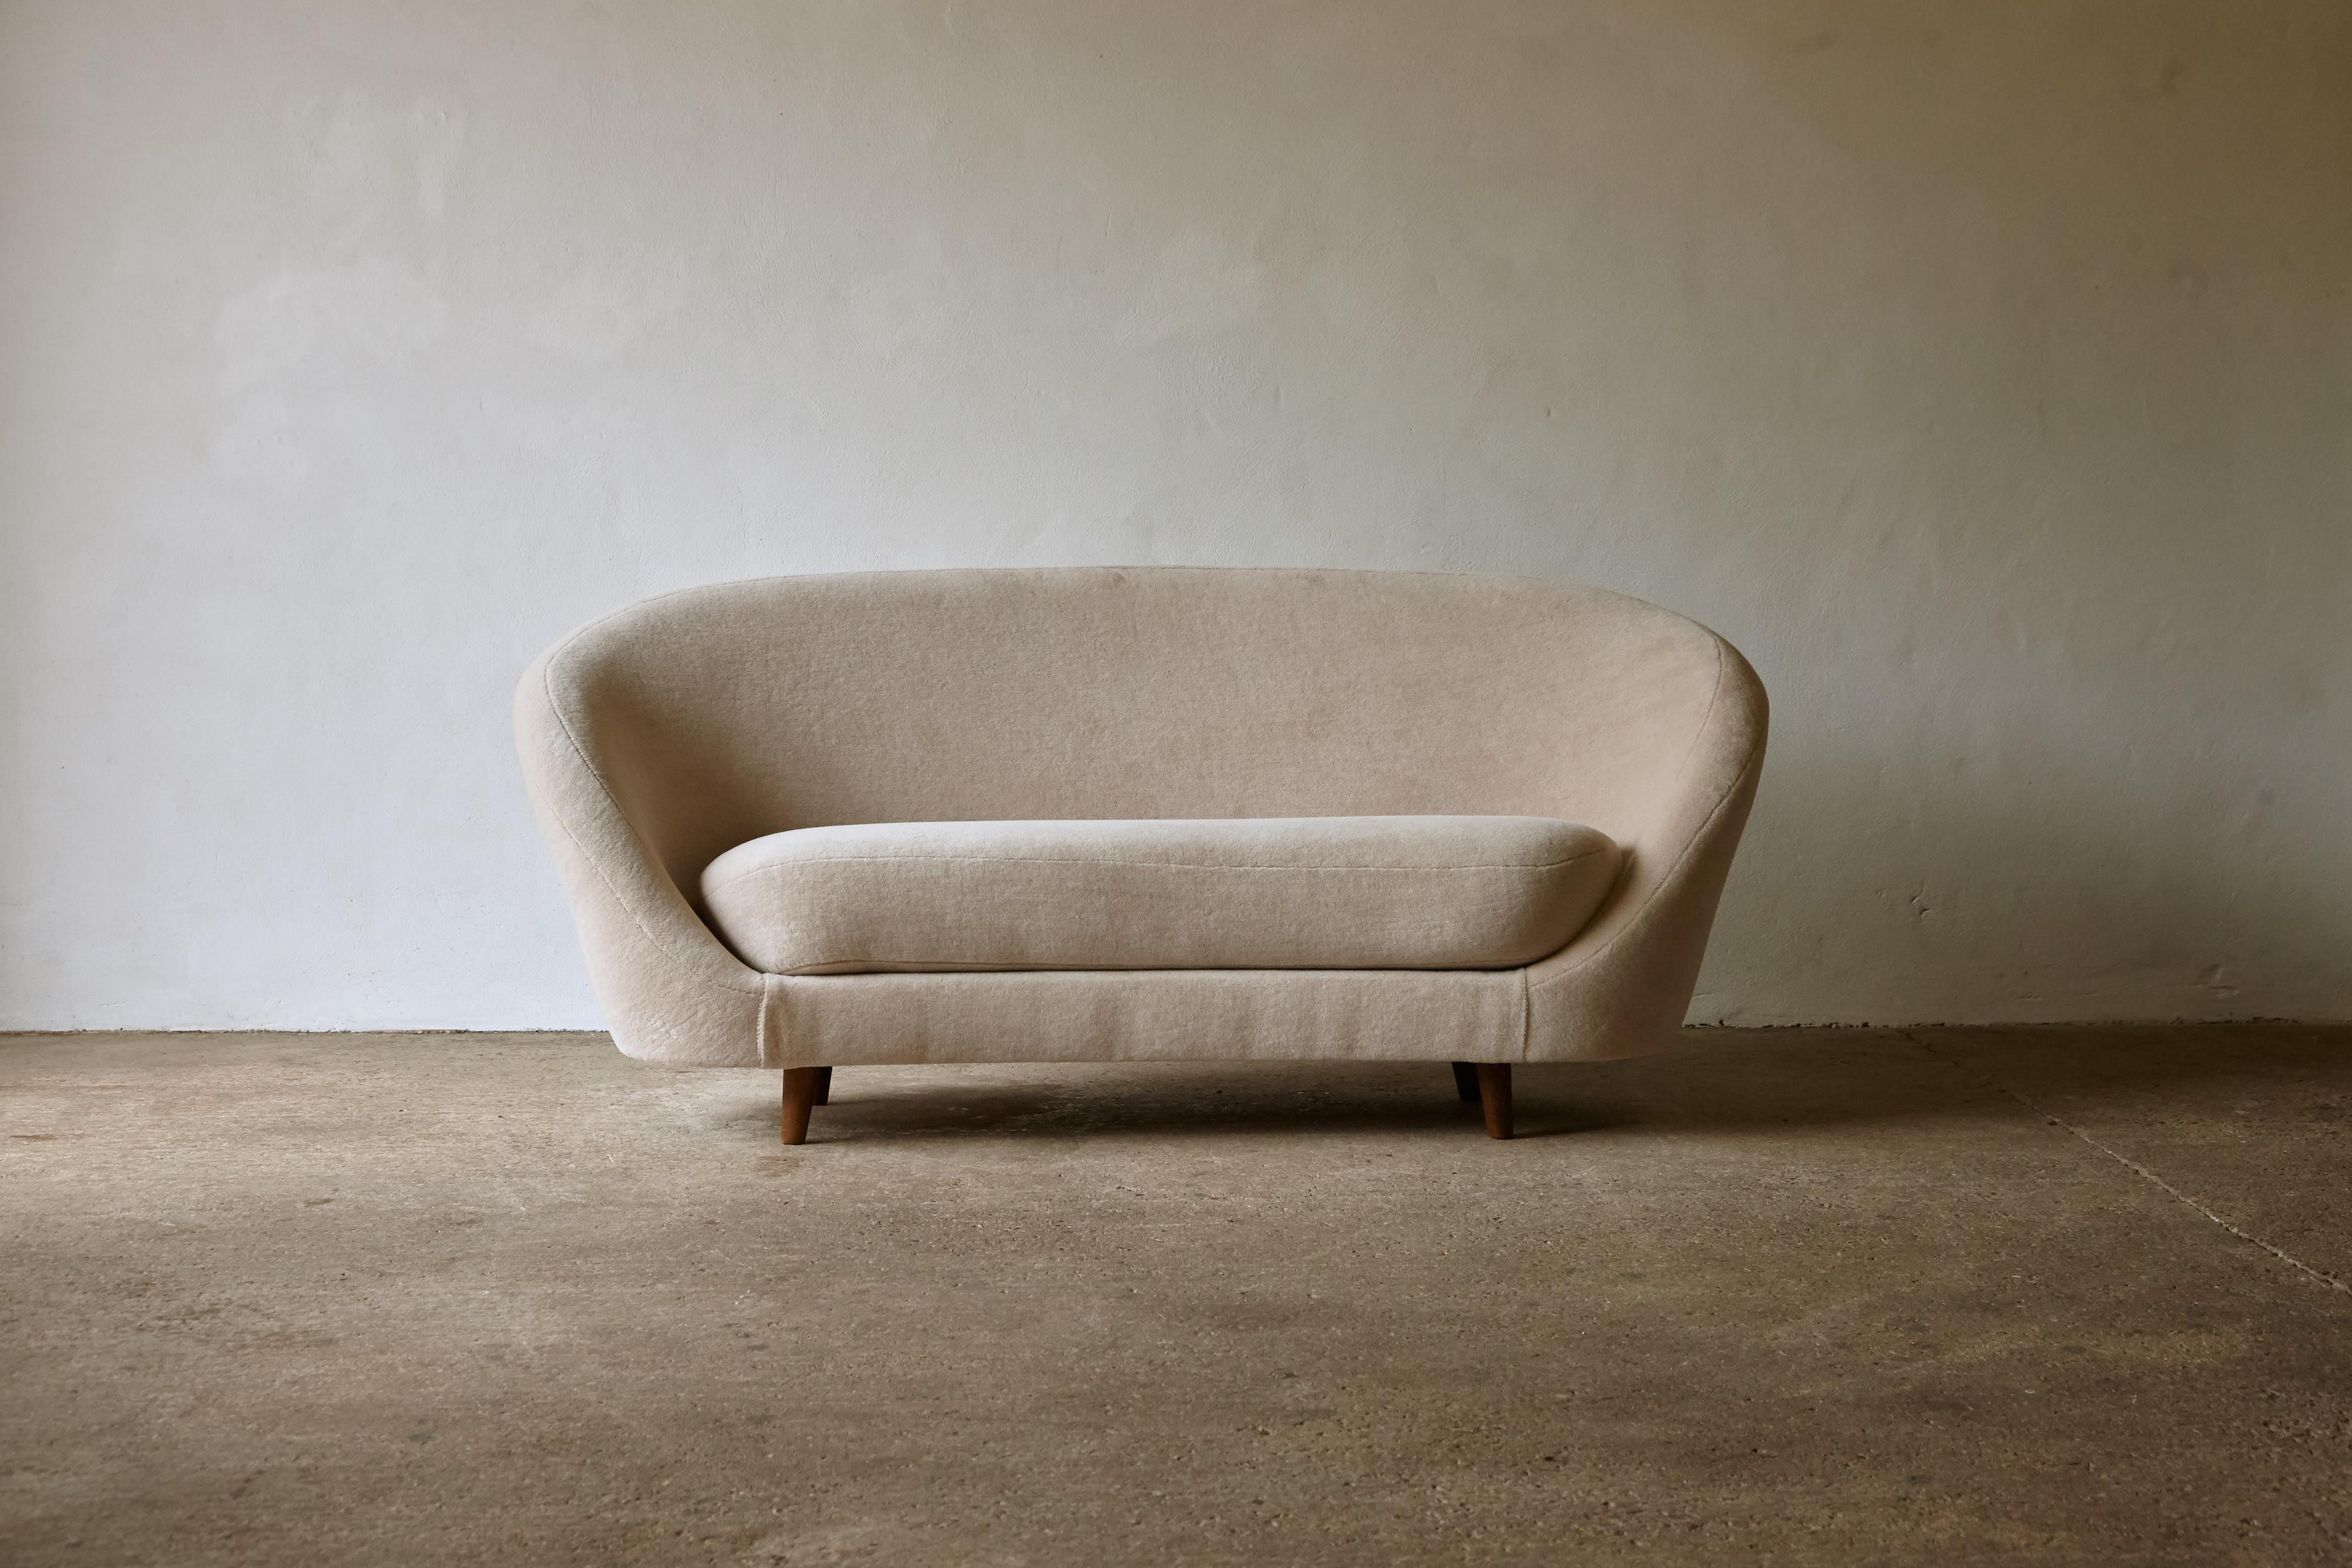 A superb and unusual Italian 1950s/1960s egg shaped sofa, in the style of Ico Parisi. The sofa has been reupholstered in an ivory pure alpaca fabric and is of a curved, narrow organic form. Ships worldwide.


